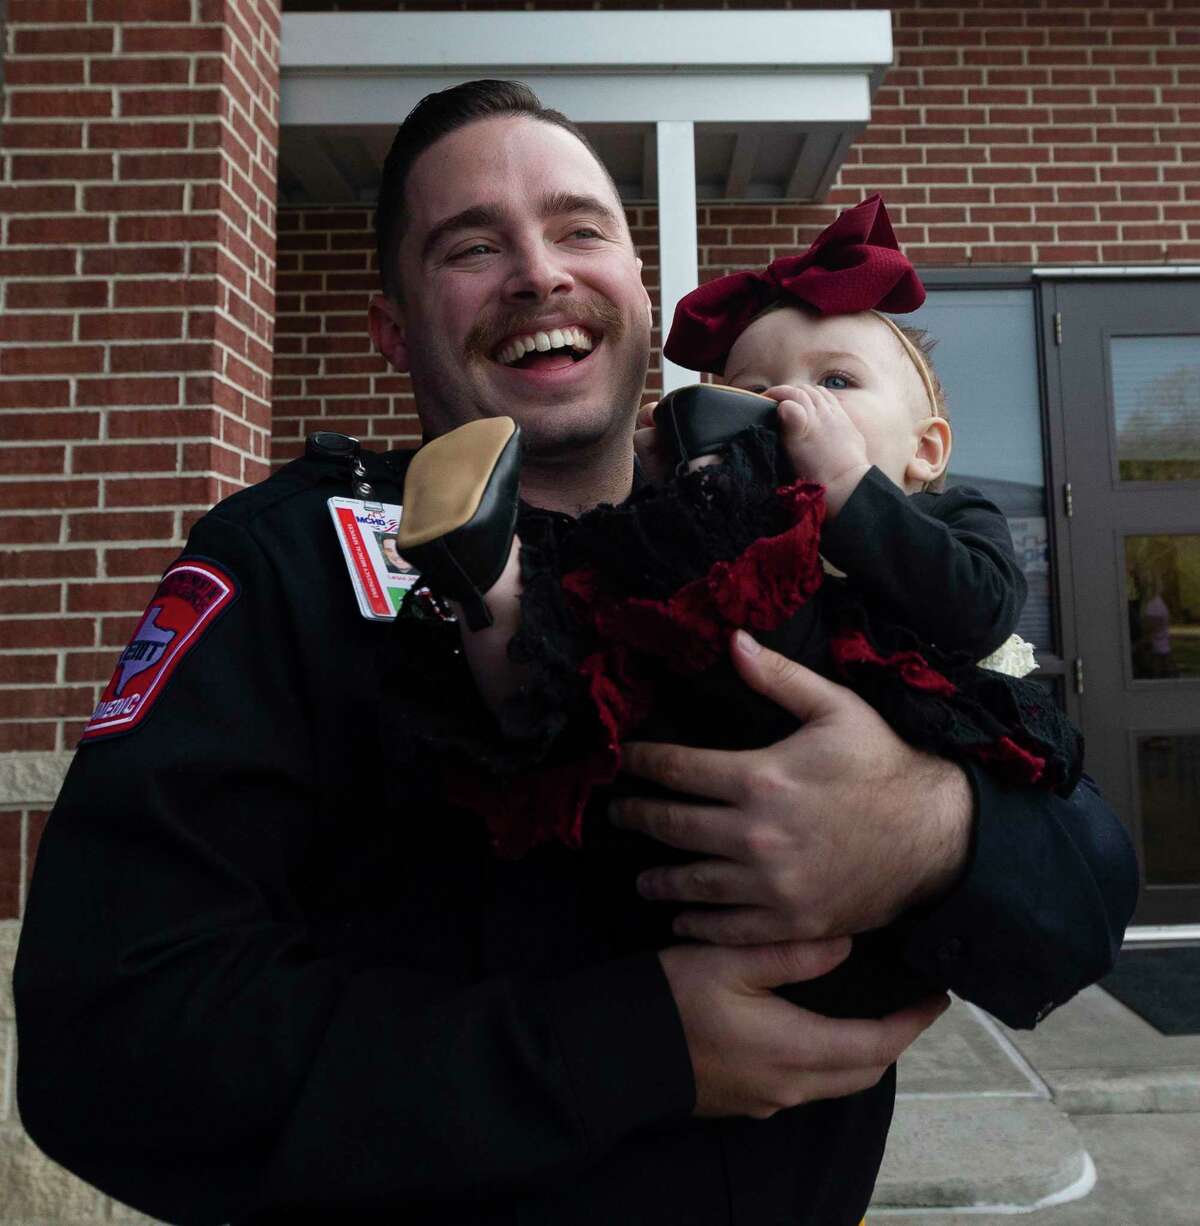 Montgomery County Hospital District paramedic Larson Johnson shares a laugh as he holds eight-month-old Khloe Mock during a visit to Montgomery Fire Station 51, Wednesday, Dec. 4, 2019, in Montgomery. Firefighters from Station 51 and MCHD paramedics reunited with Mock and her family after they helped her mother, Lindey, deliver Khloe in the back of her SUV while traveling on Texas-105 back on March 22.